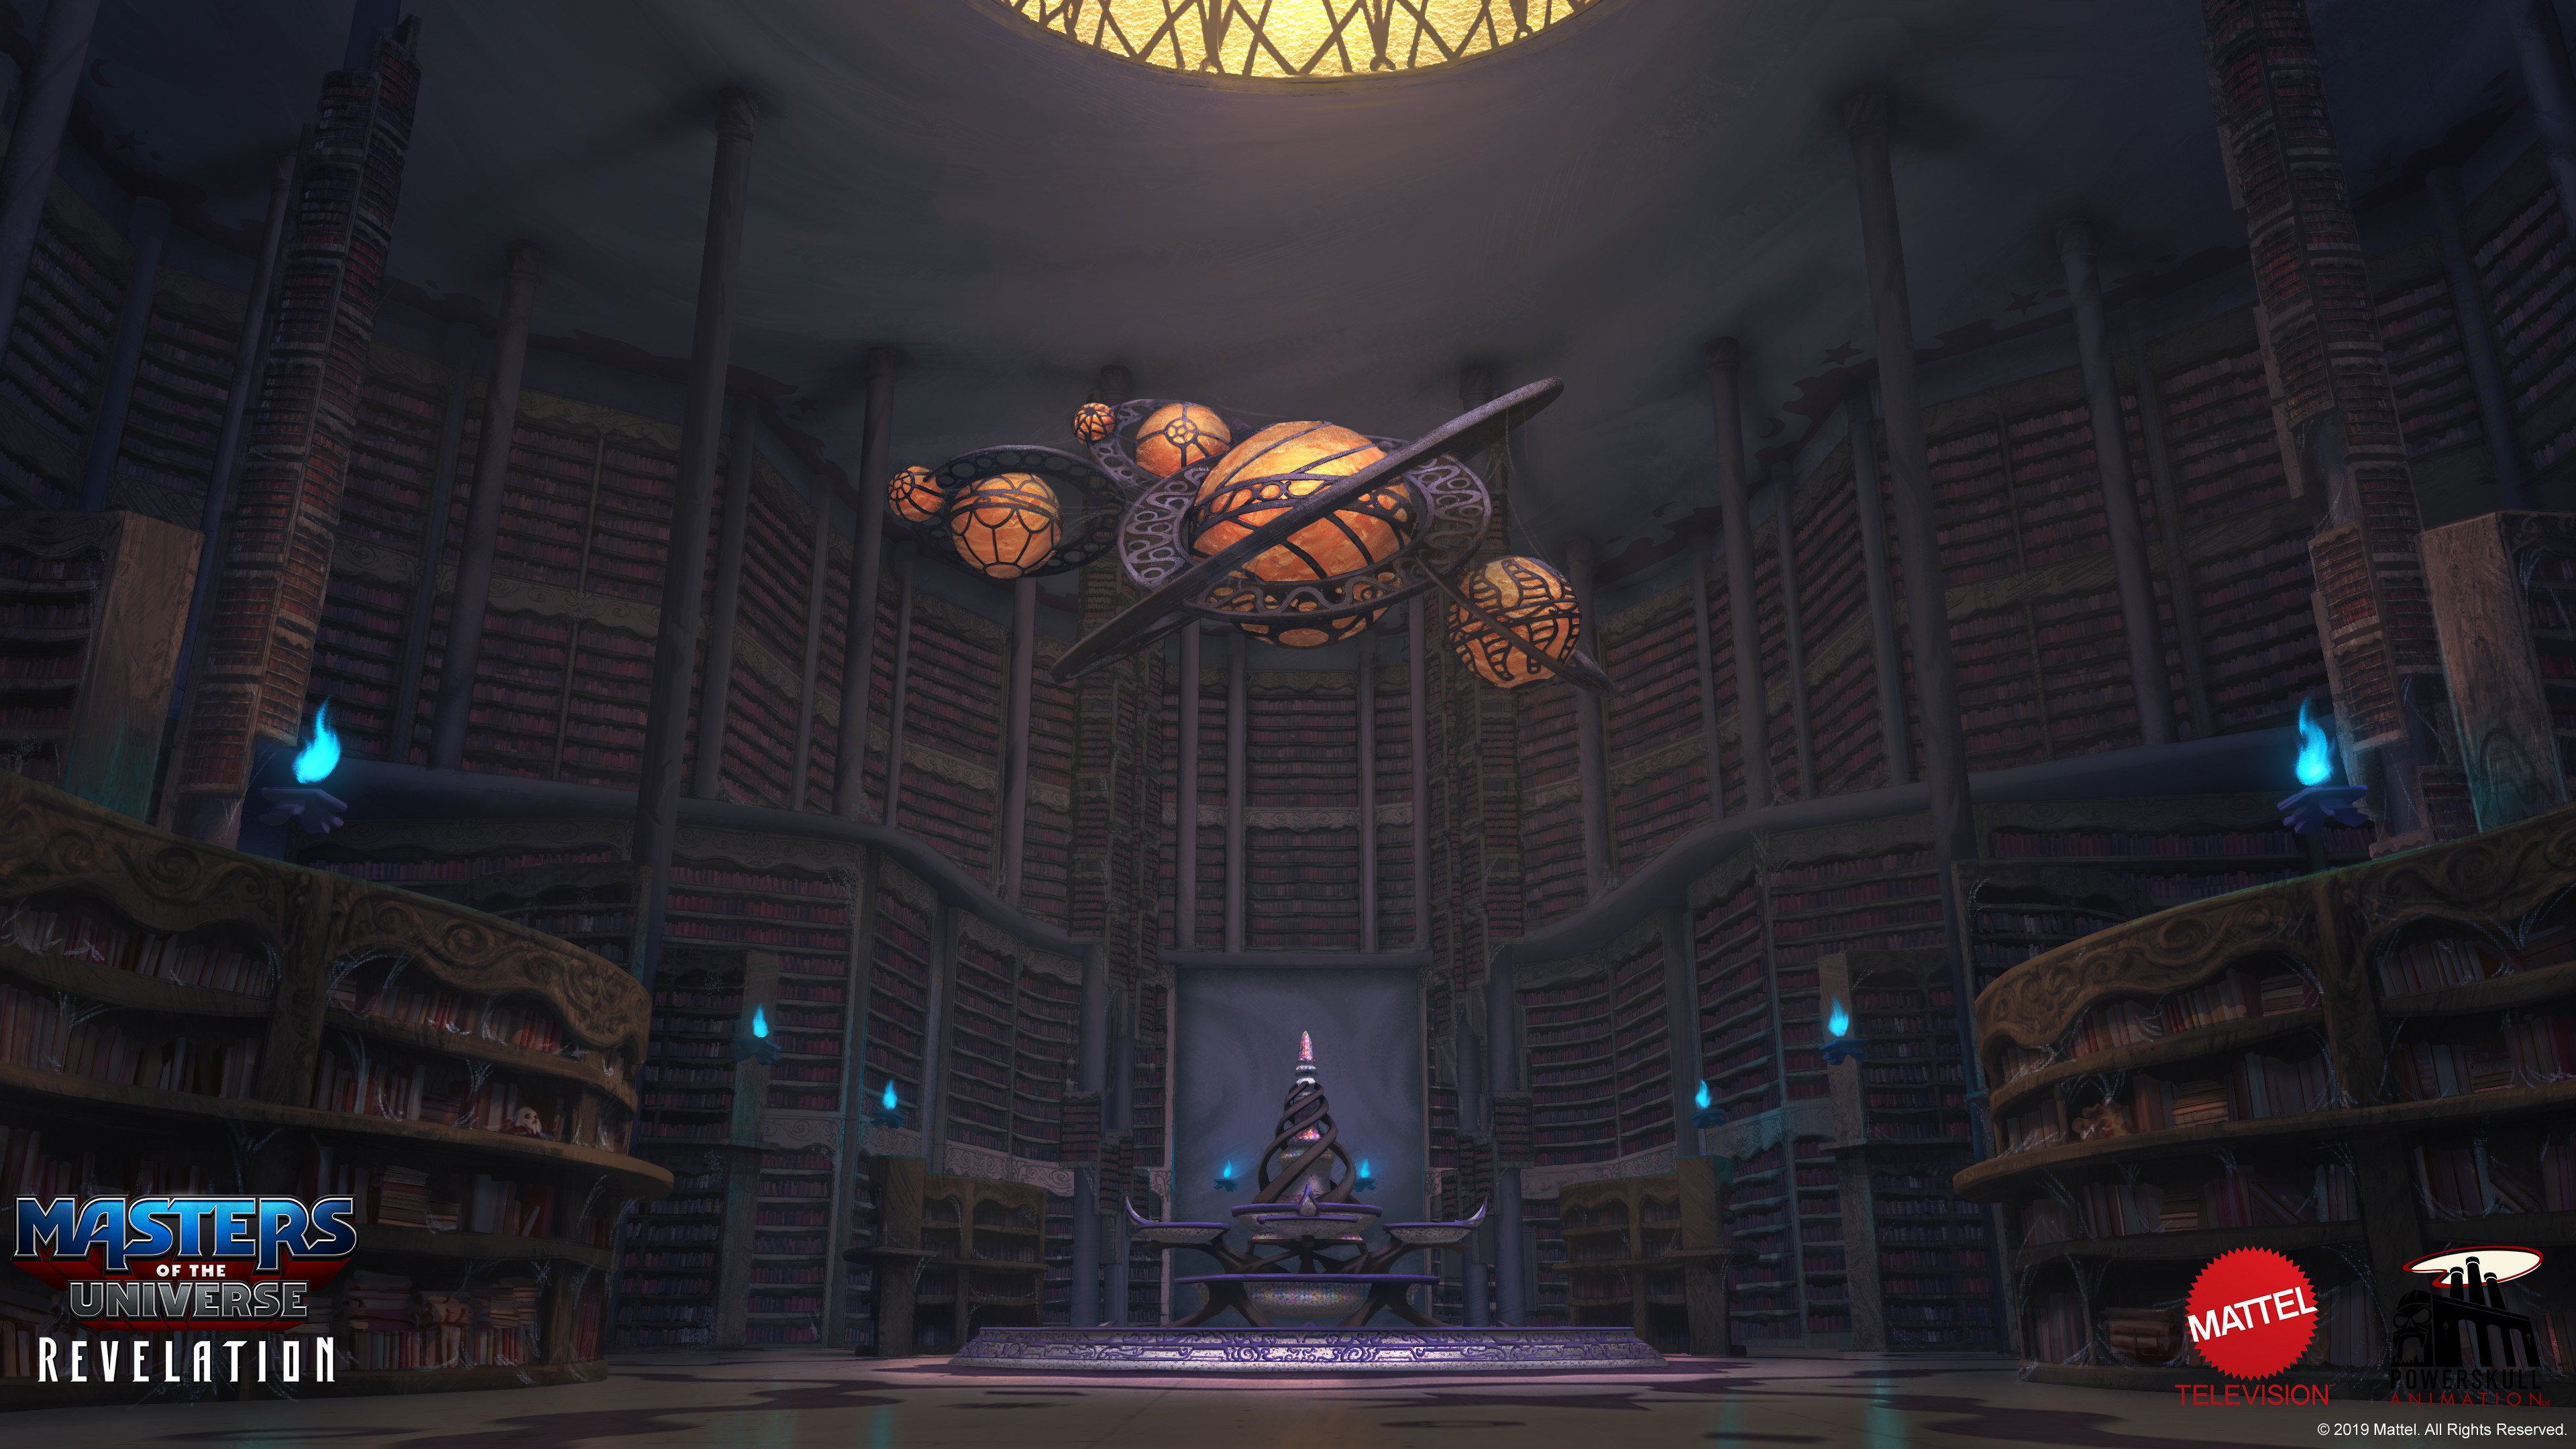 Masters of the Universe: Revelation HD wallpaper featuring a grand library interior with magical elements and ambient lighting, perfect for desktop background.